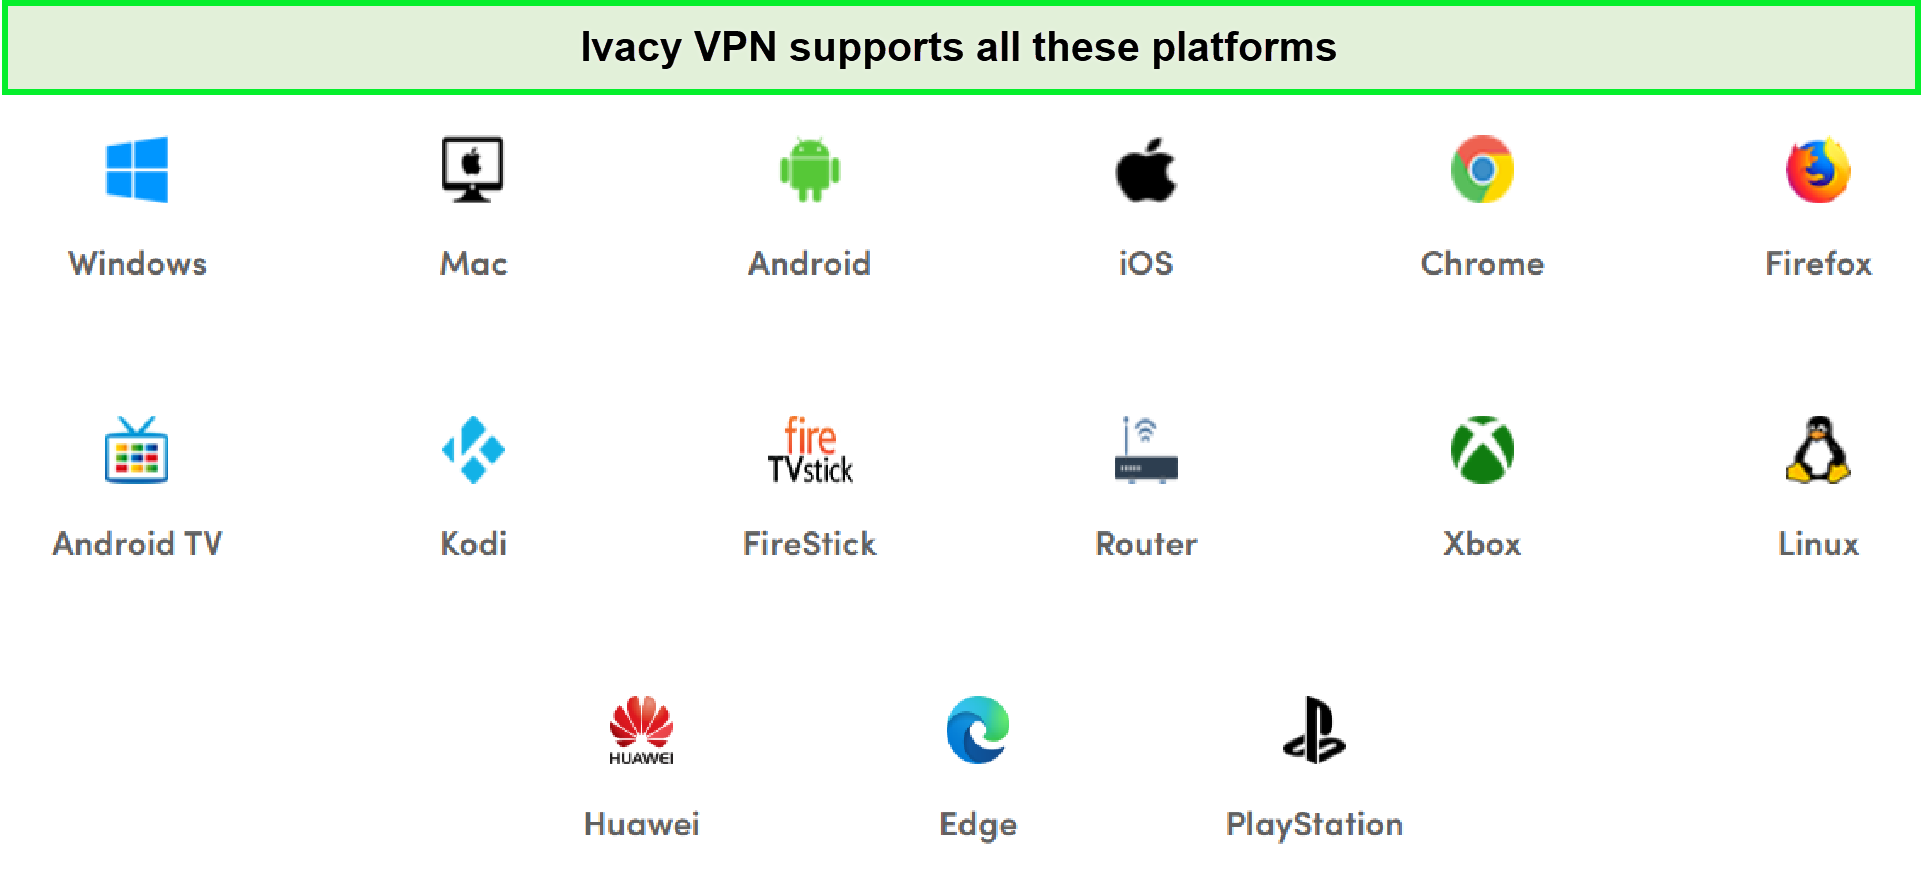 ivacy-device-compatibility-in-Spain